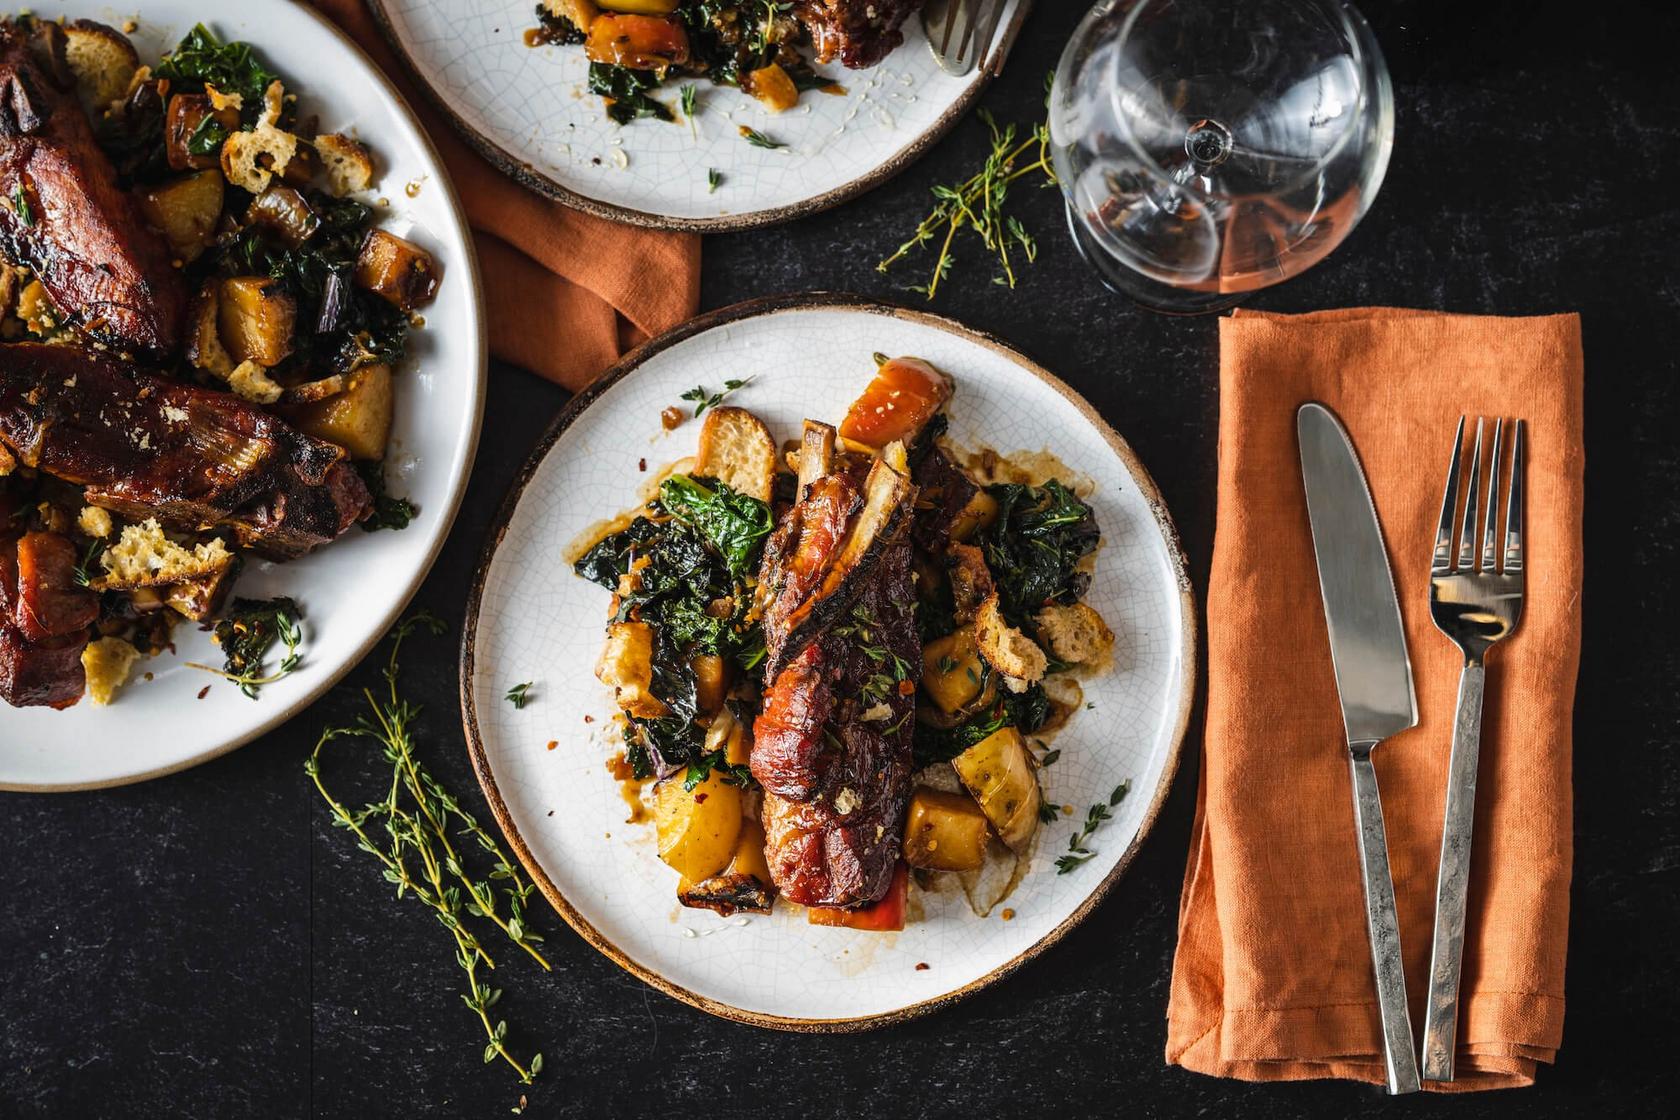 Country-Style Ribs with Apple and Kale